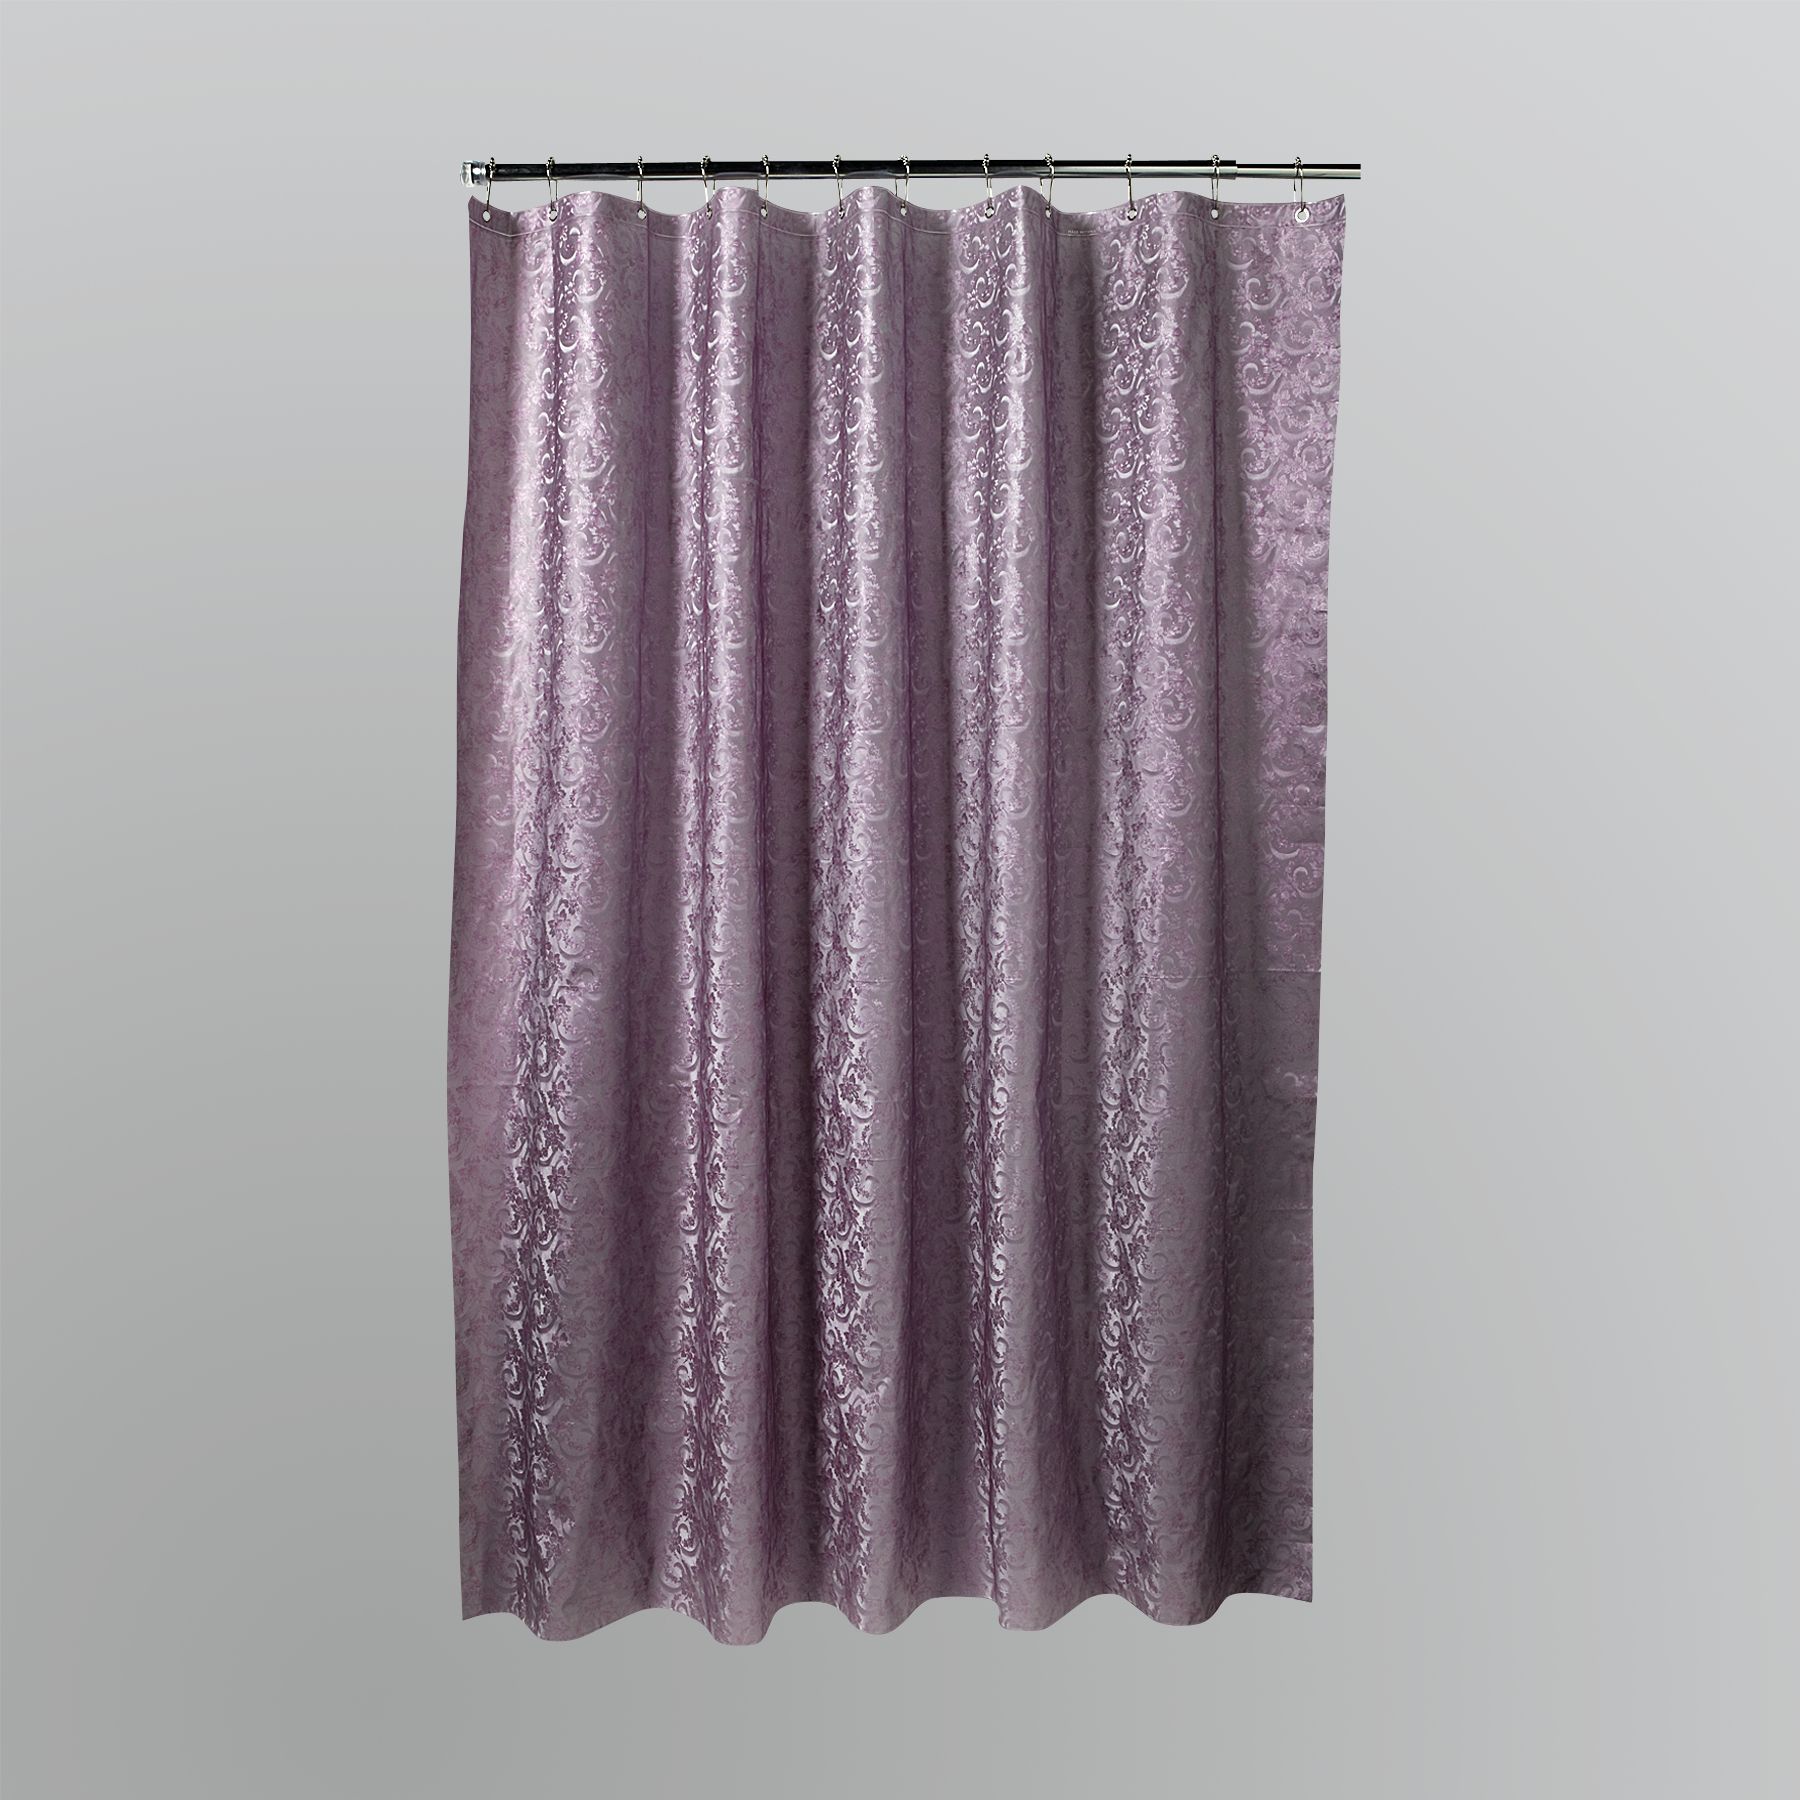 H20 Metallic Embossed Lace Shower Curtain